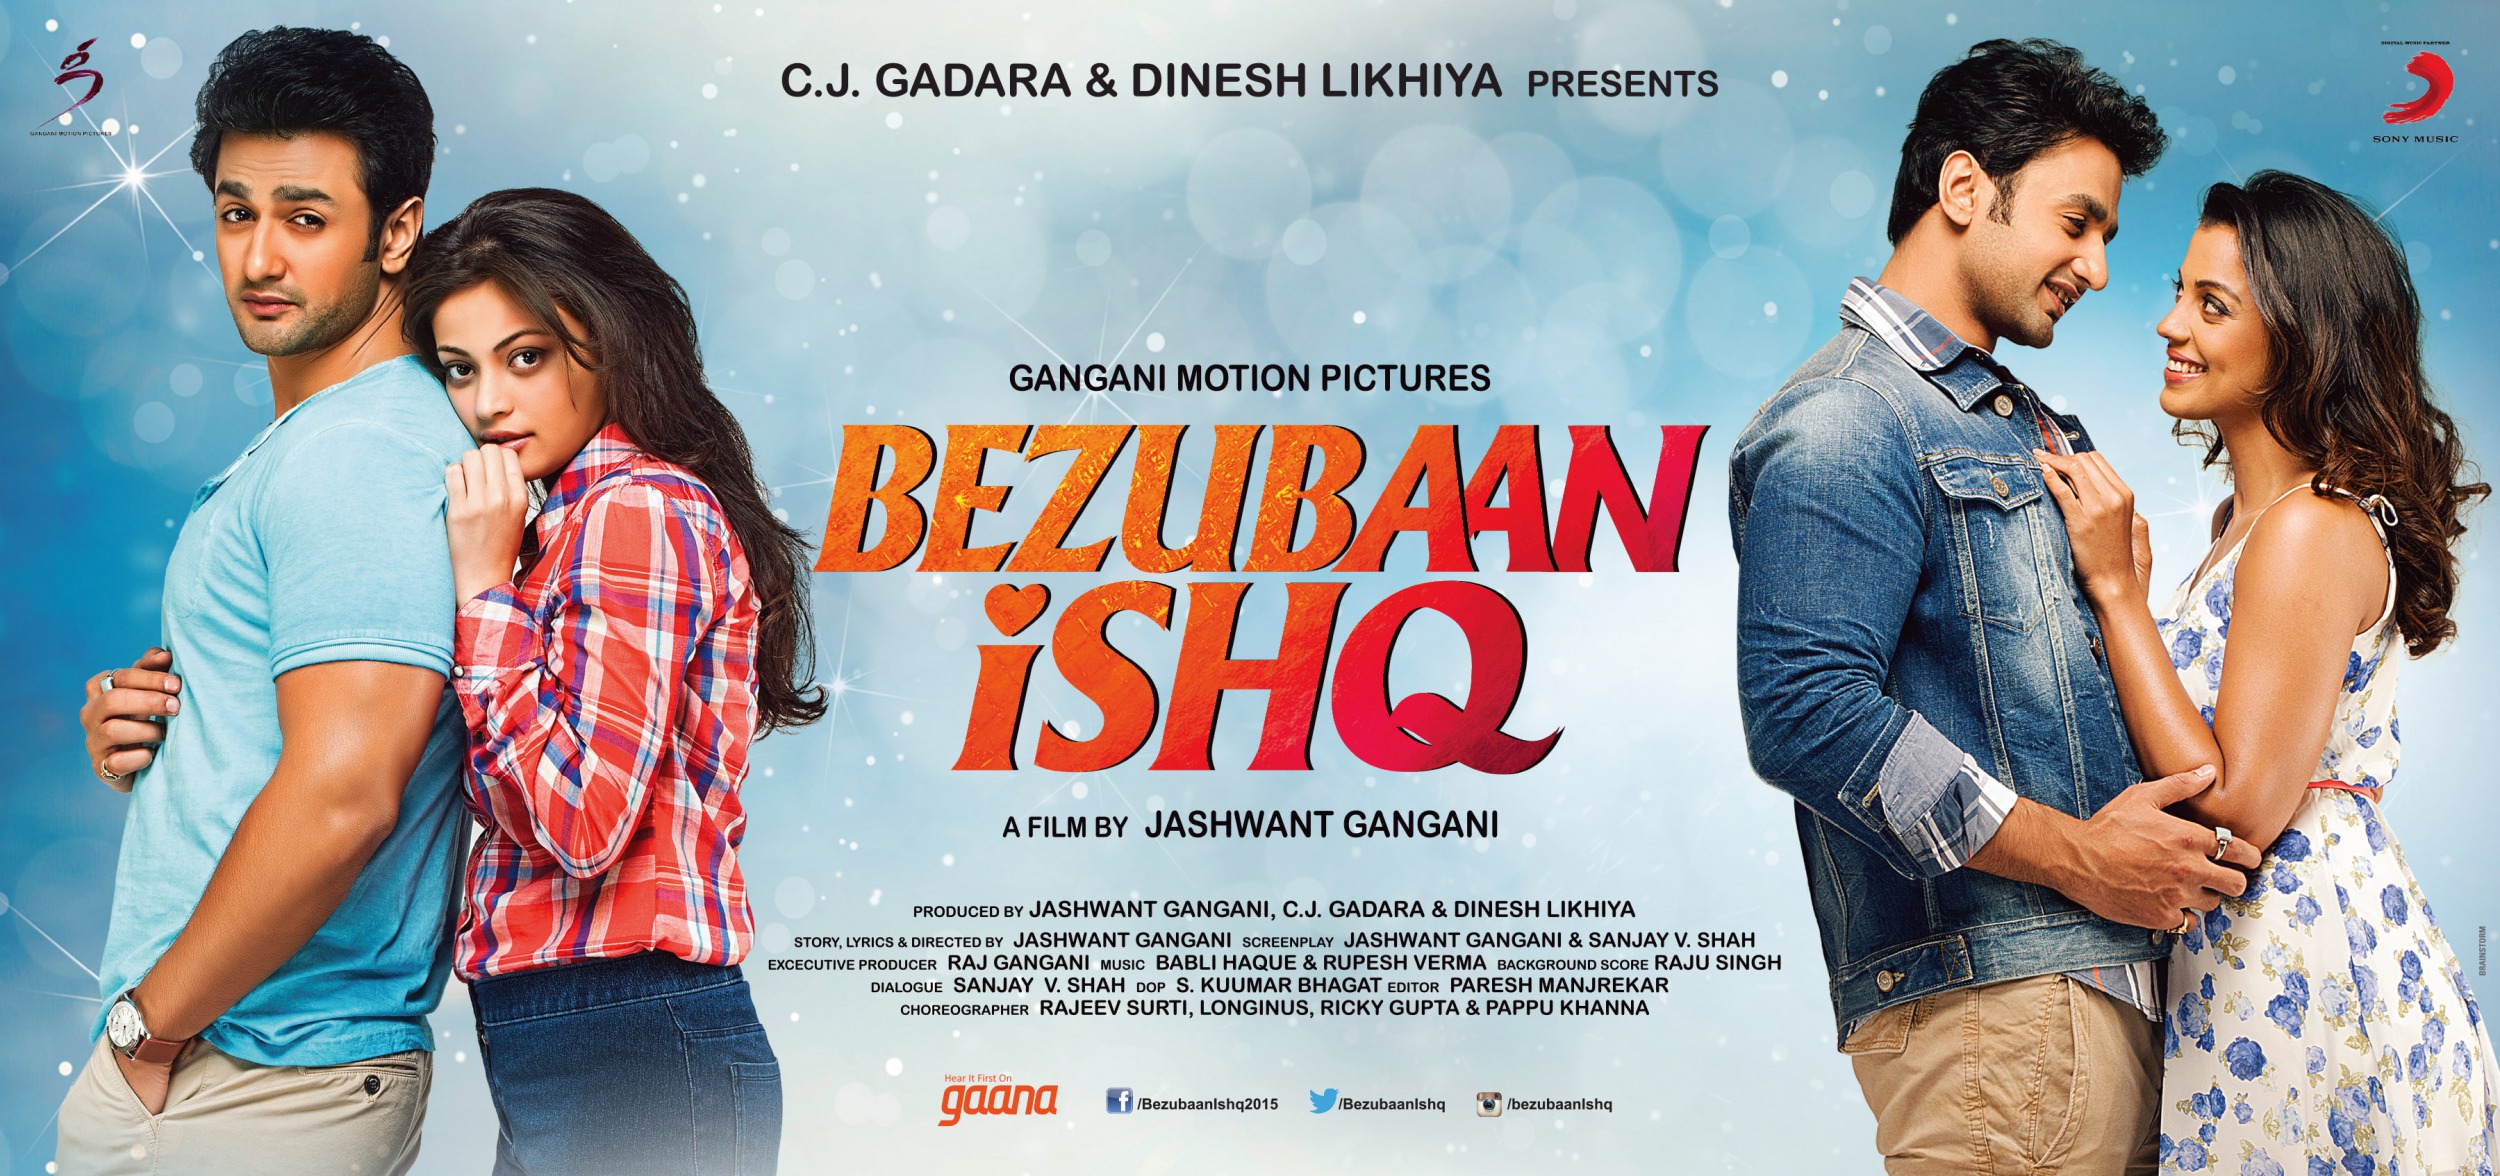 Mega Sized Movie Poster Image for Bezubaan Ishq (#4 of 4)